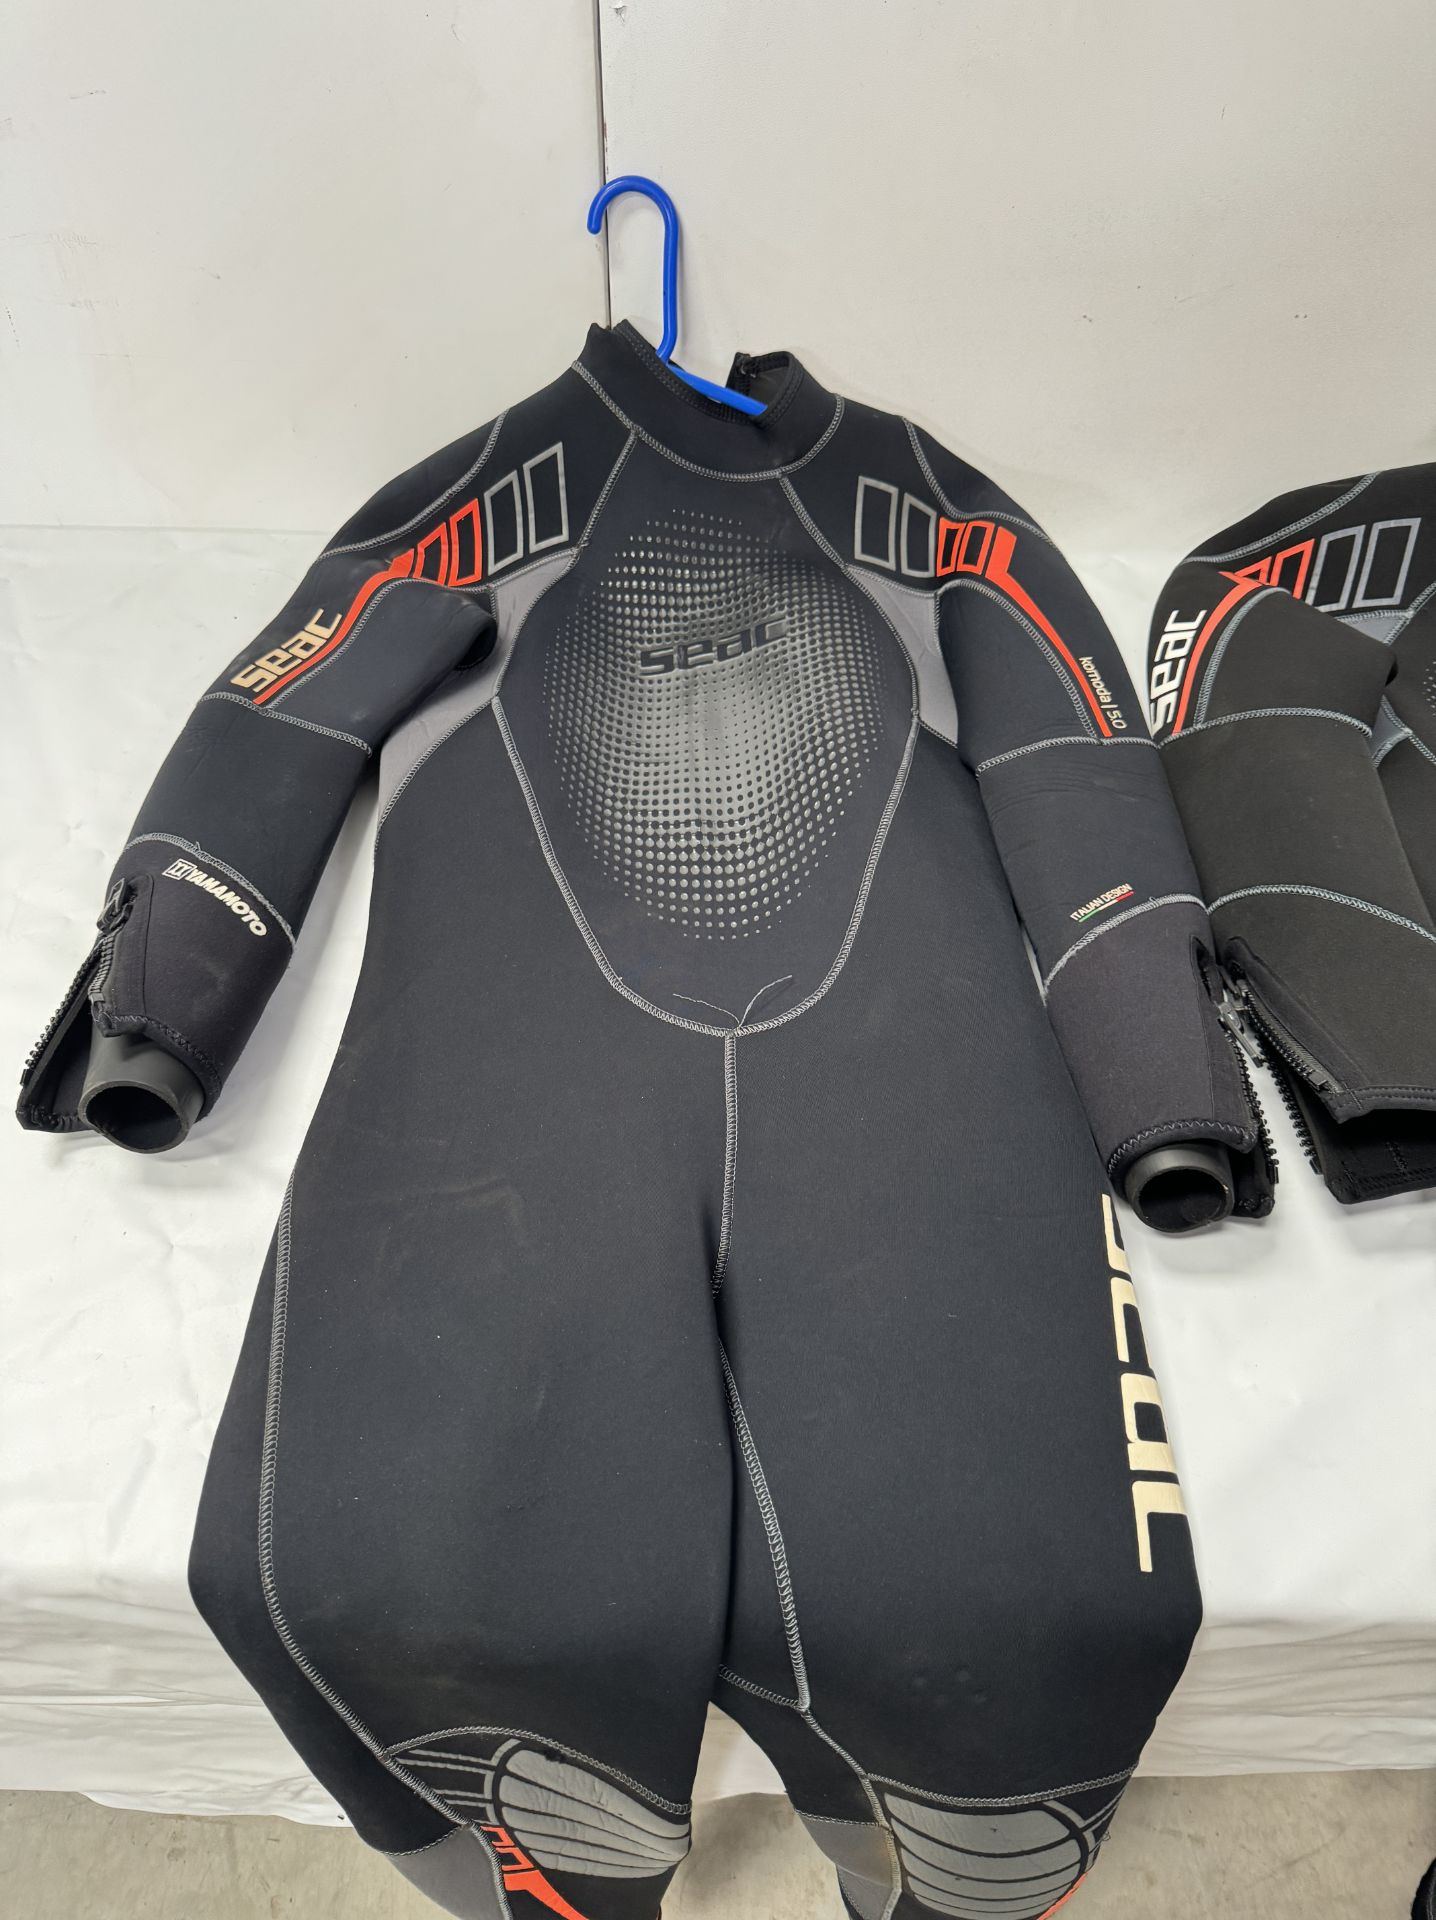 Six O’Neill, Beuchat, Seac Wetsuits (Location: Brentwood. Please Refer to General Notes) - Image 14 of 18